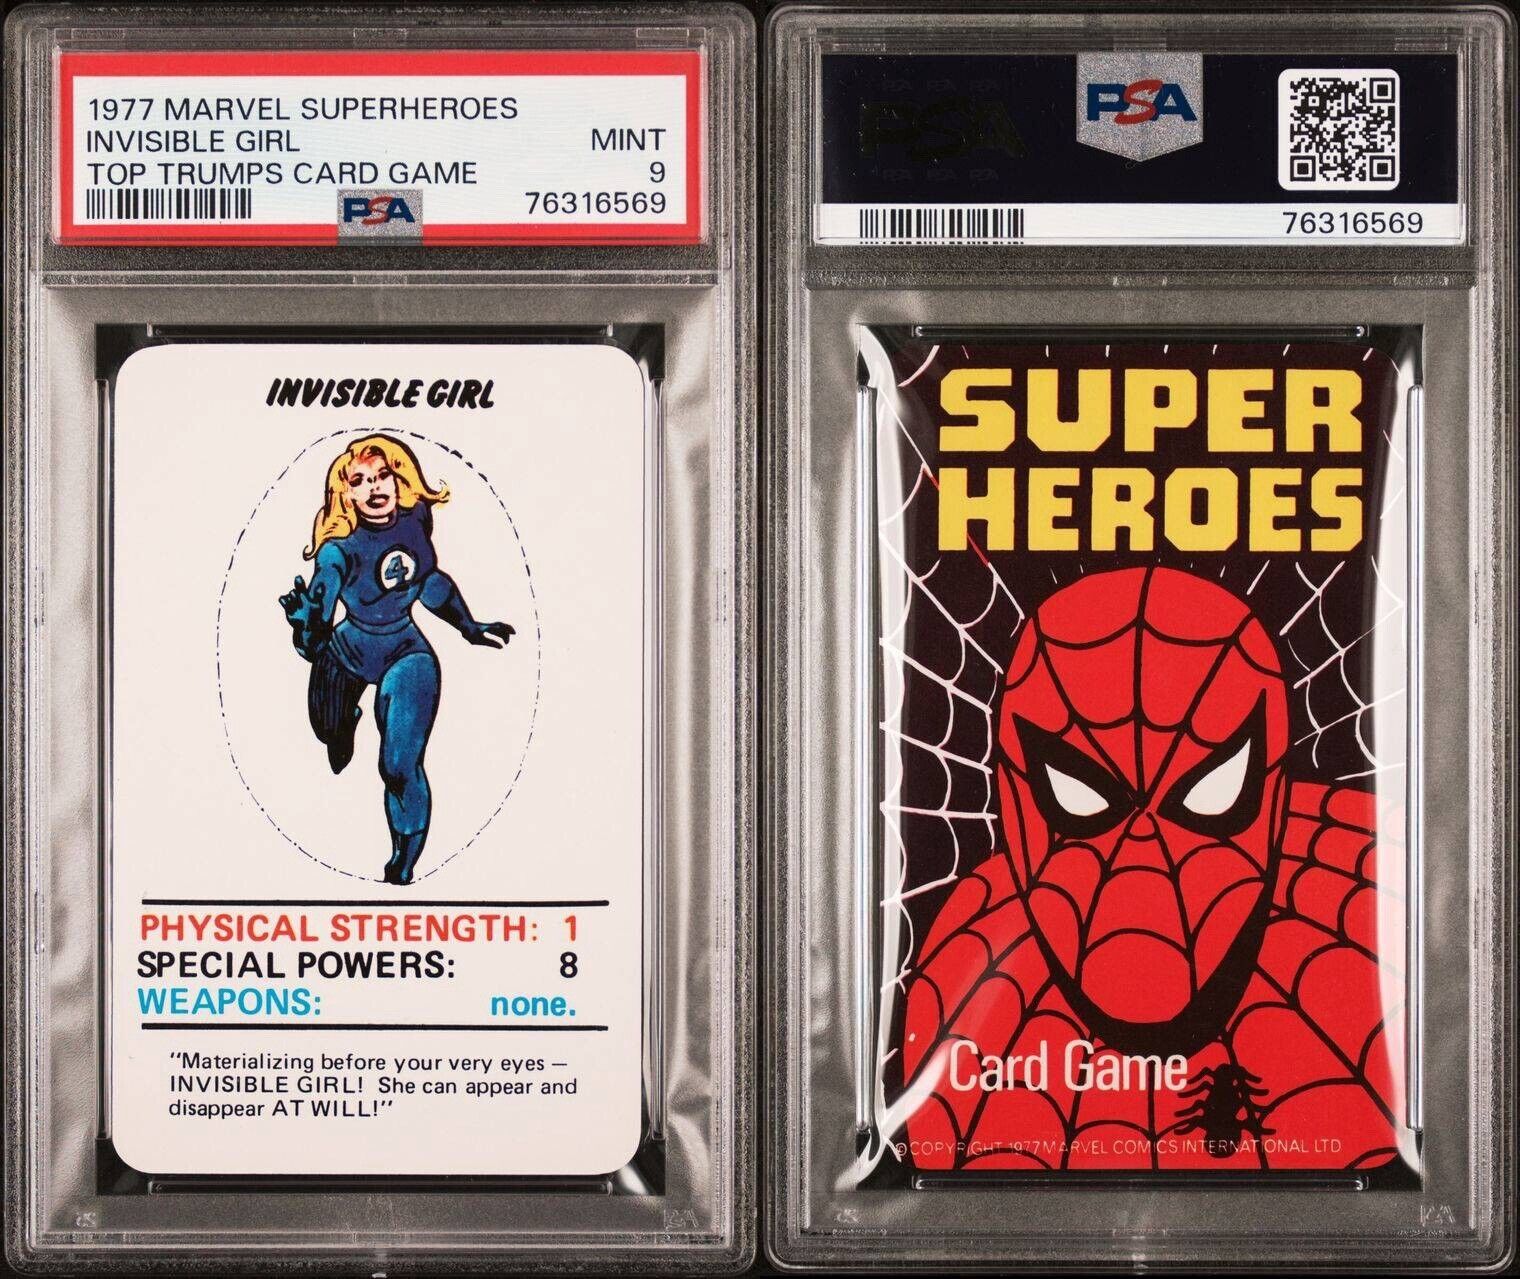 1977 MARVEL SUPERHEROES INVISIBLE GIRL TOP TRUMPS CARD GAME PSA 9 MINT POP 2